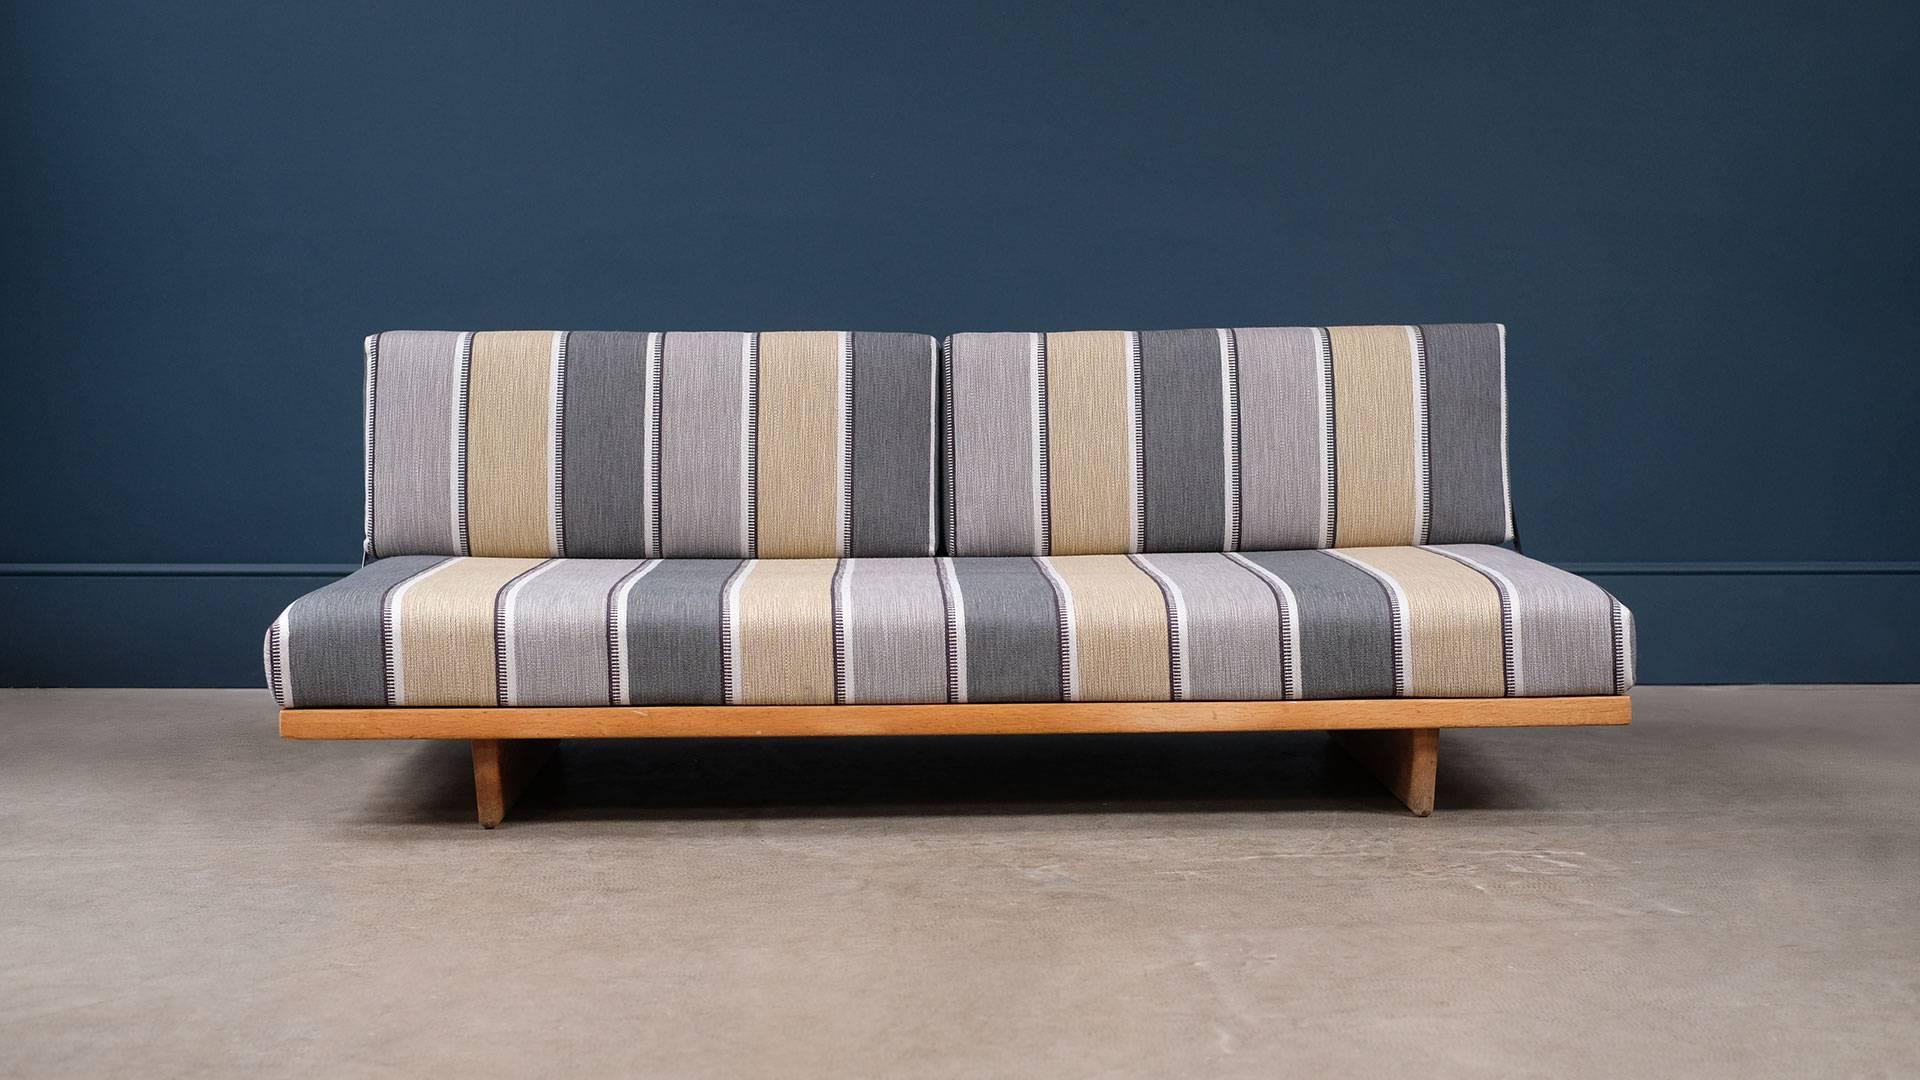 Rare and beautiful daybed or studio couch in solid oak with refurbished and beautifully reupholstered original fully sprung cushions designed by Børge Mogensen for Fredericia, Denmark. Seldom seen wonderful piece of Danish design. New fabric by